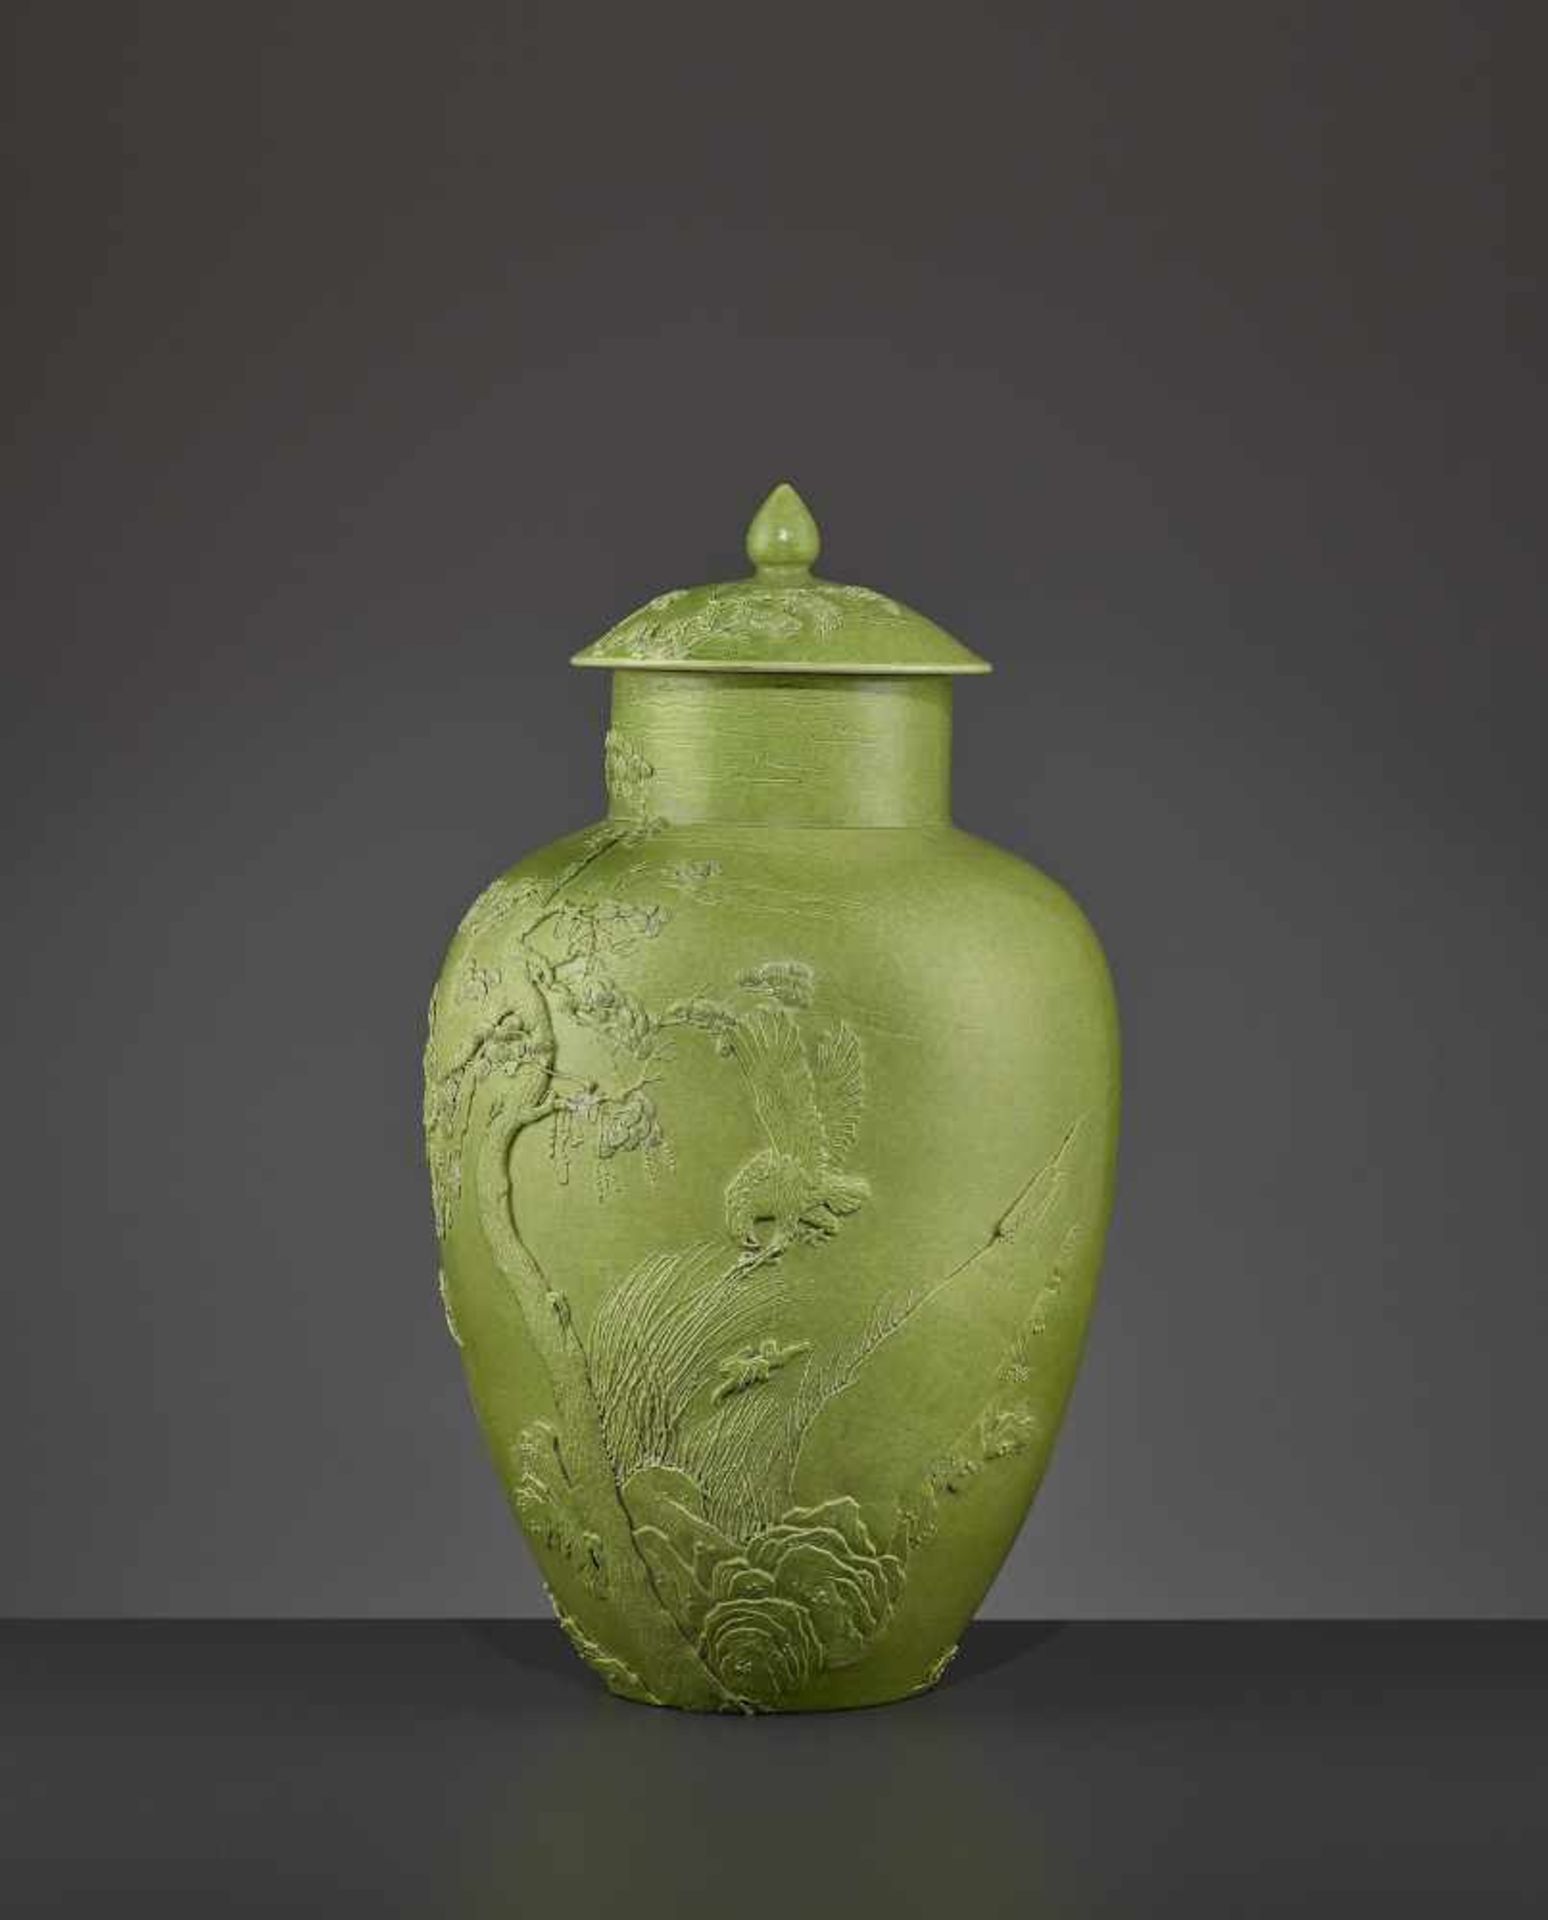 A VASE BY WANG BINGRONG (1840-1900)China. The lidded vessel with a striking lime-green glaze. Molded